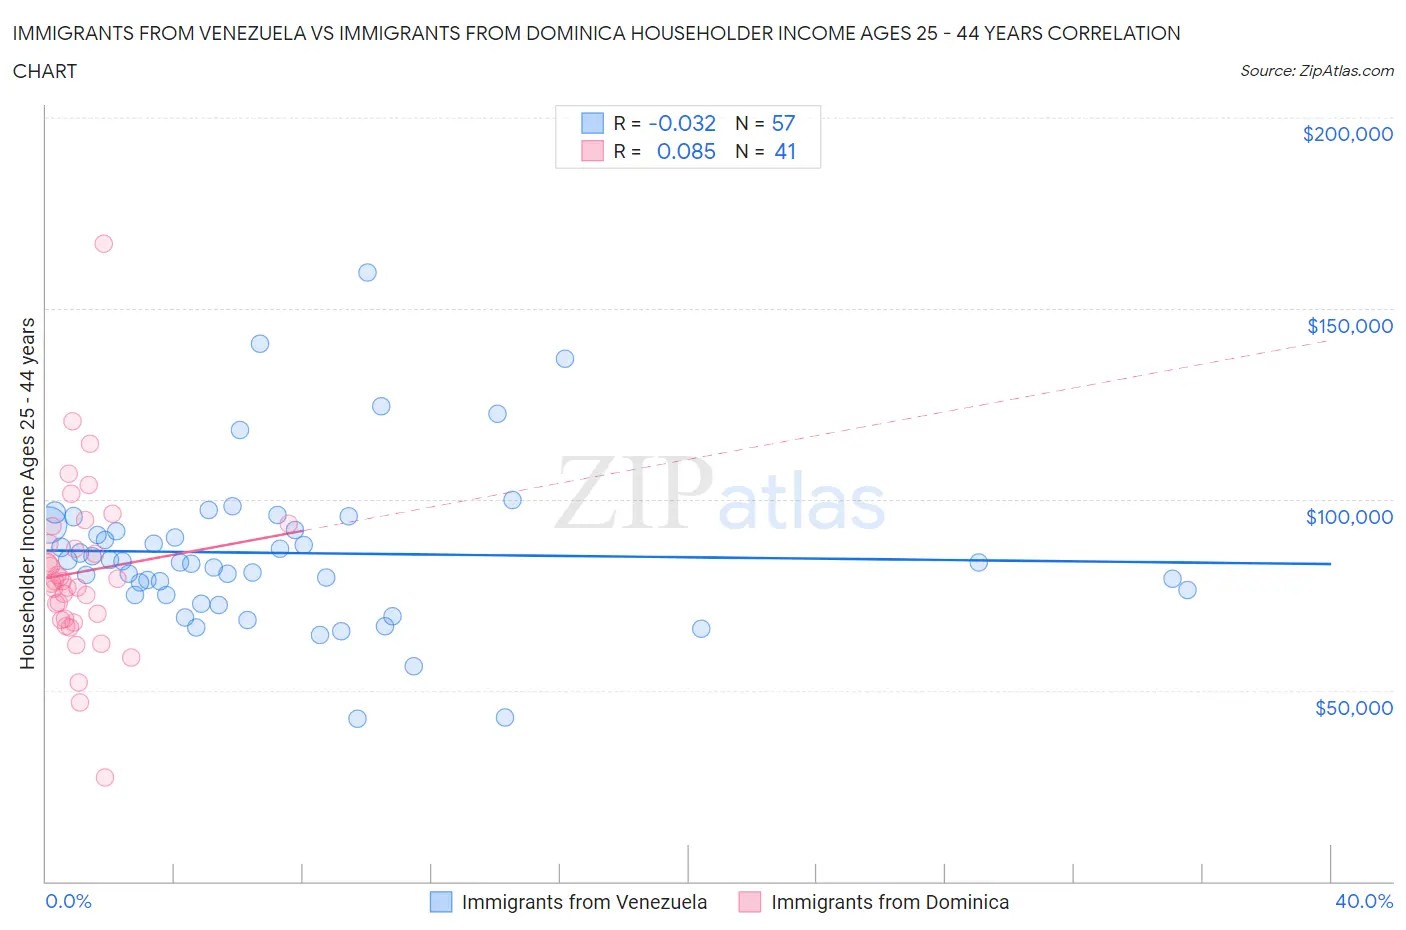 Immigrants from Venezuela vs Immigrants from Dominica Householder Income Ages 25 - 44 years